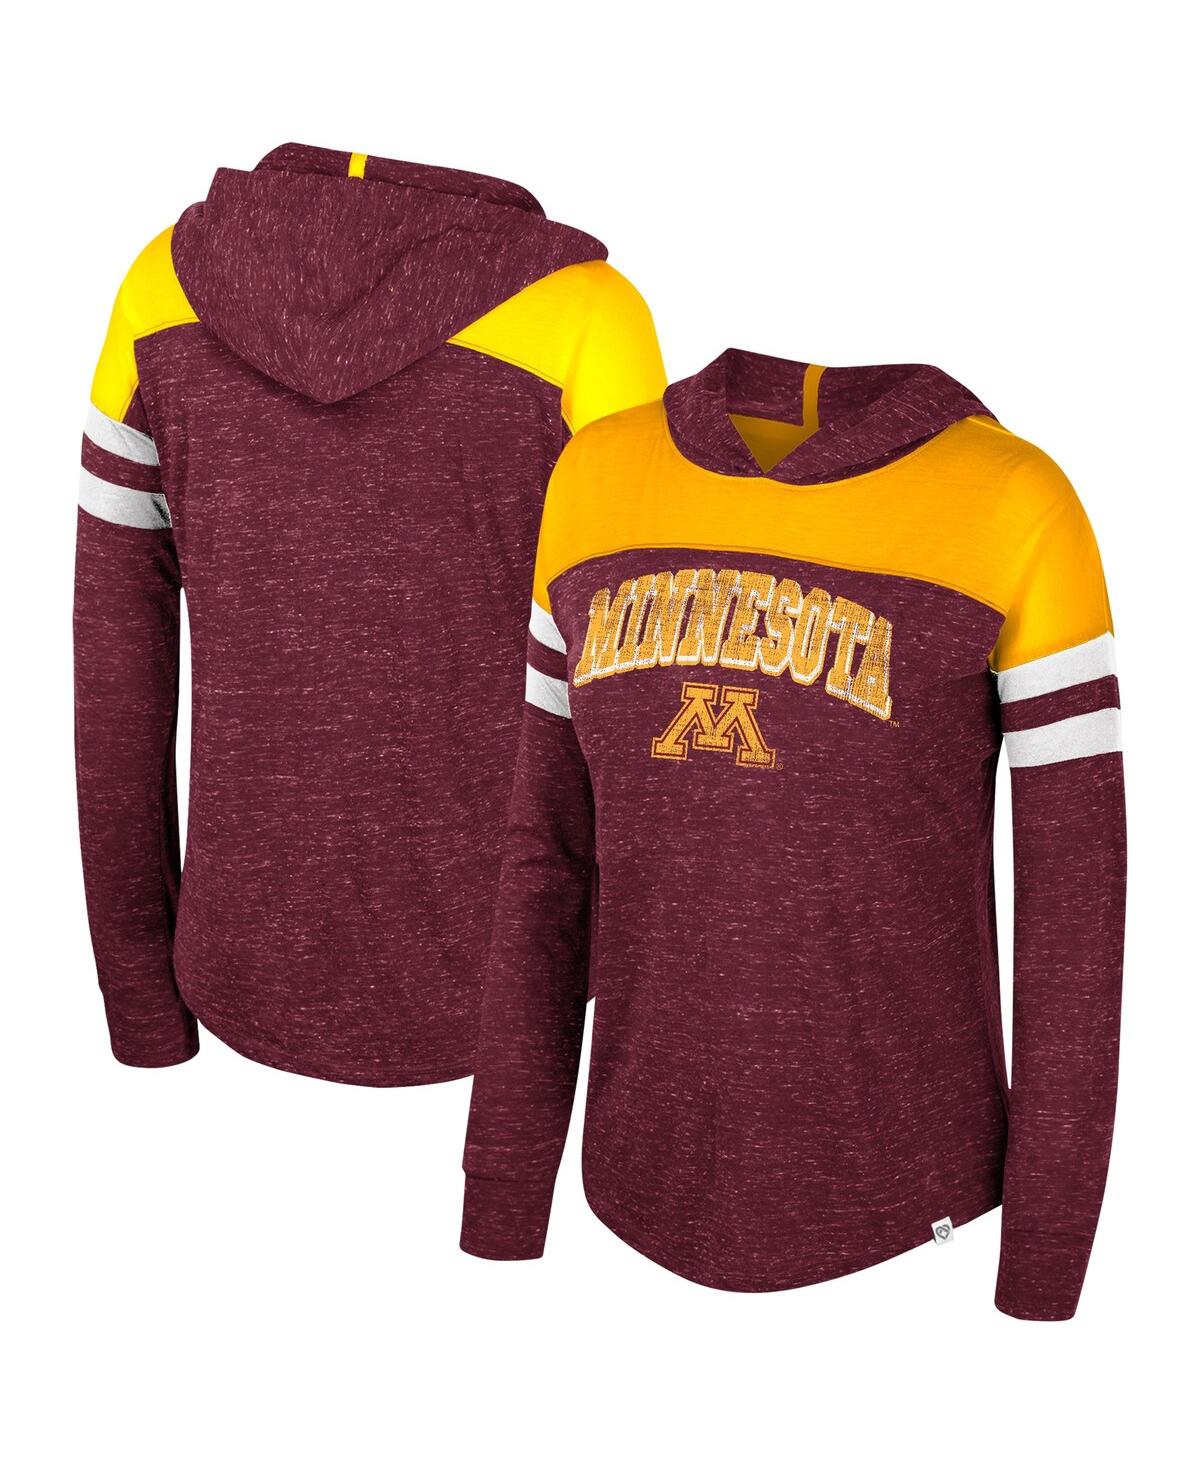 Women's Colosseum Maroon Distressed Minnesota Golden Gophers Speckled Color Block Long Sleeve Hooded T-shirt - Maroon